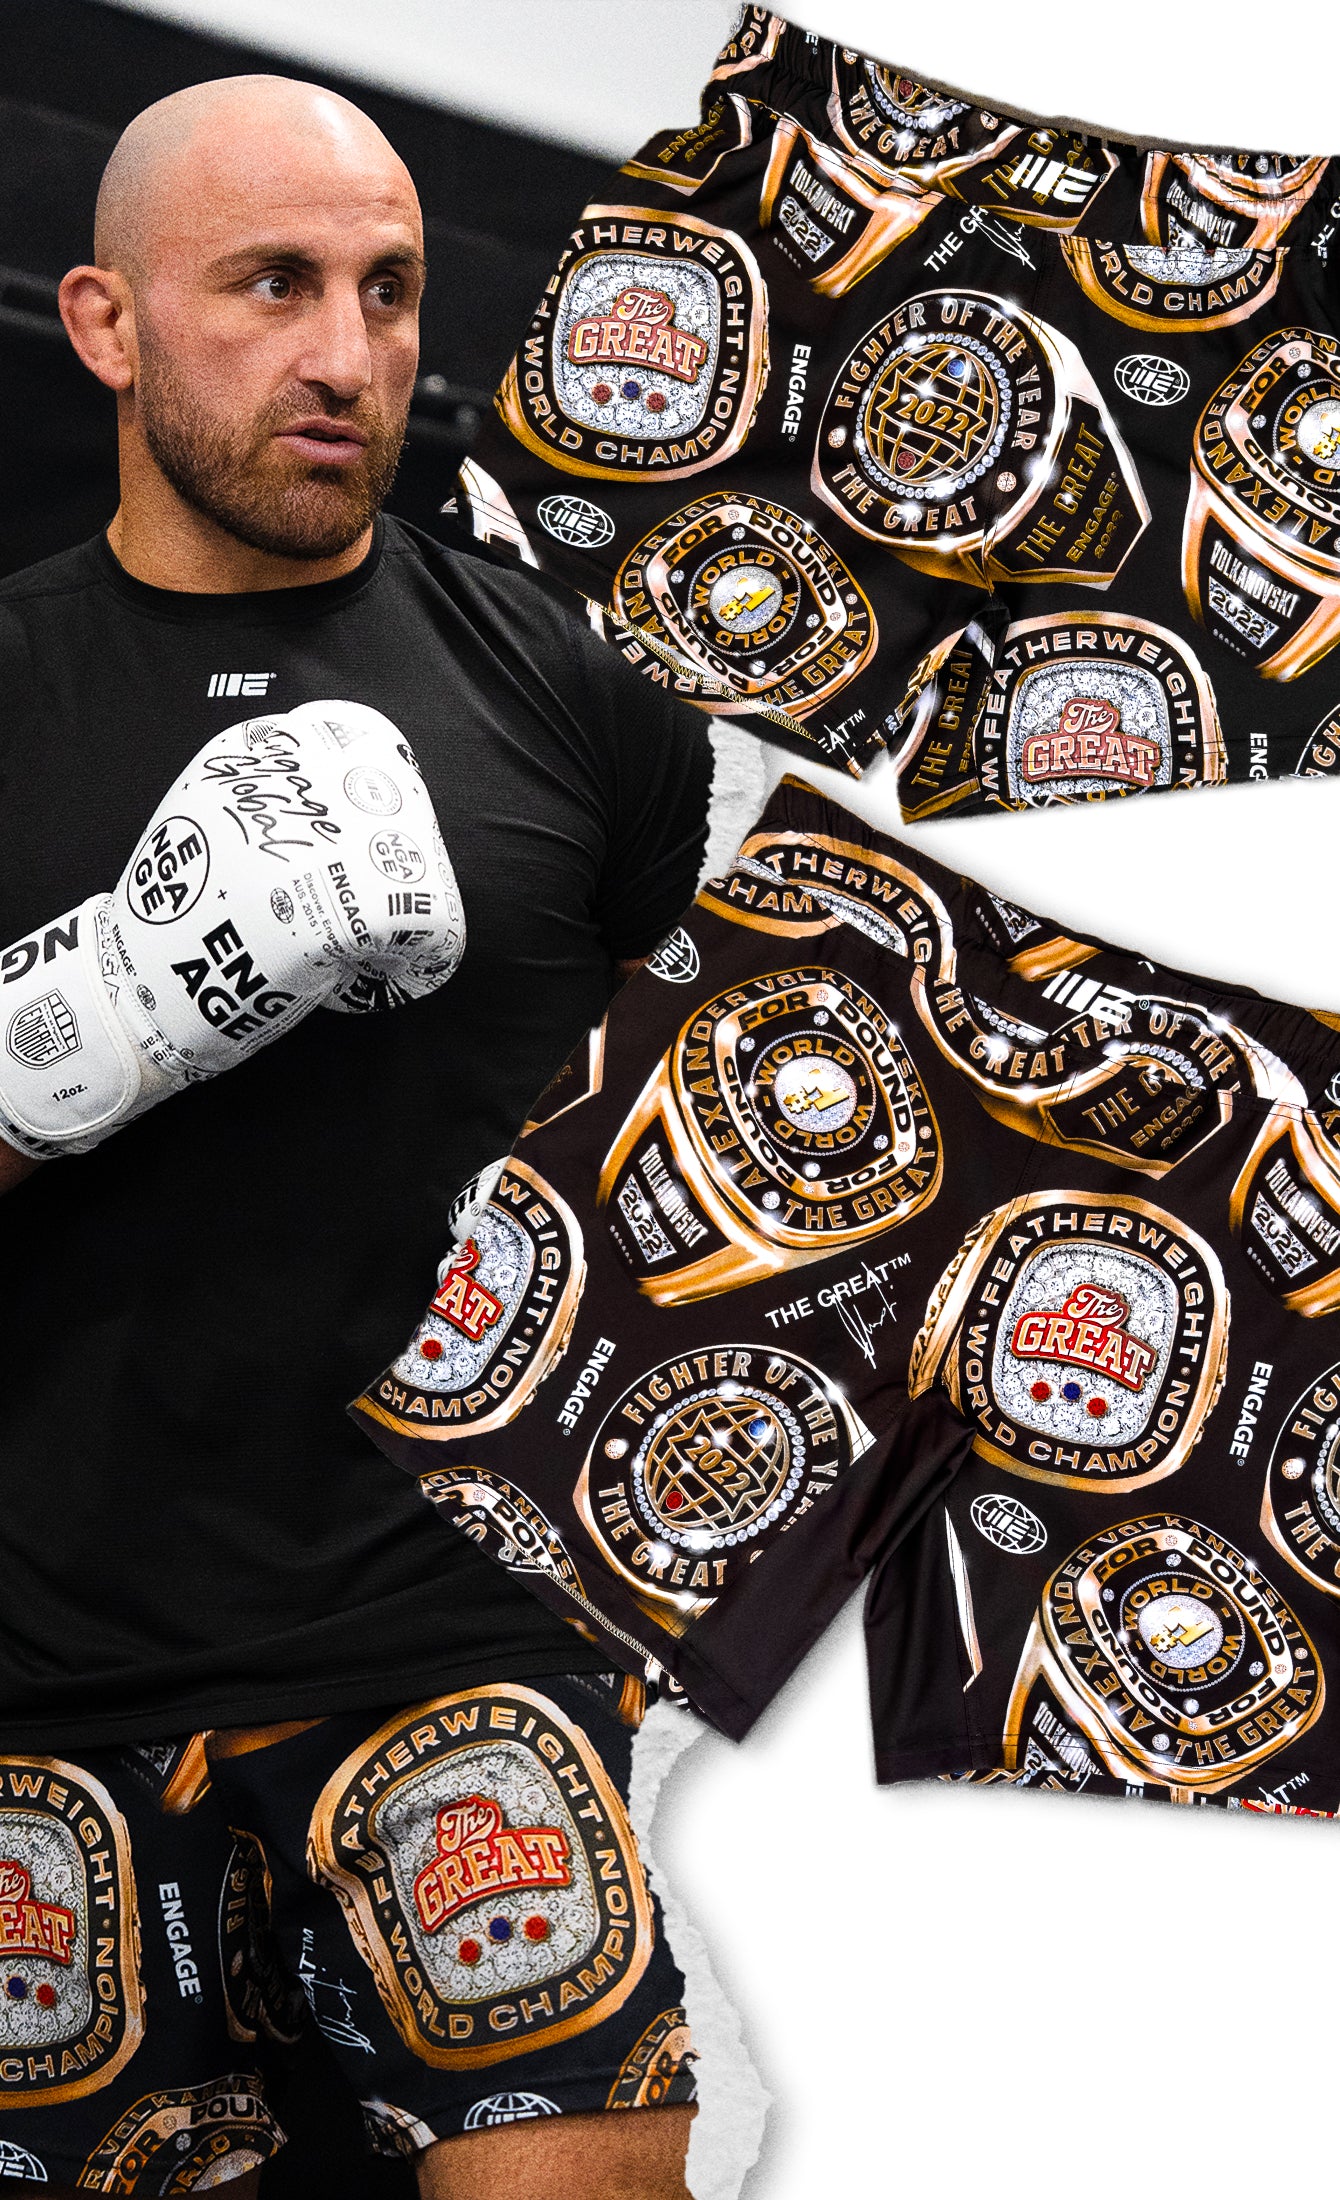 Engage Online Store MMA Apparel and Training Equipment